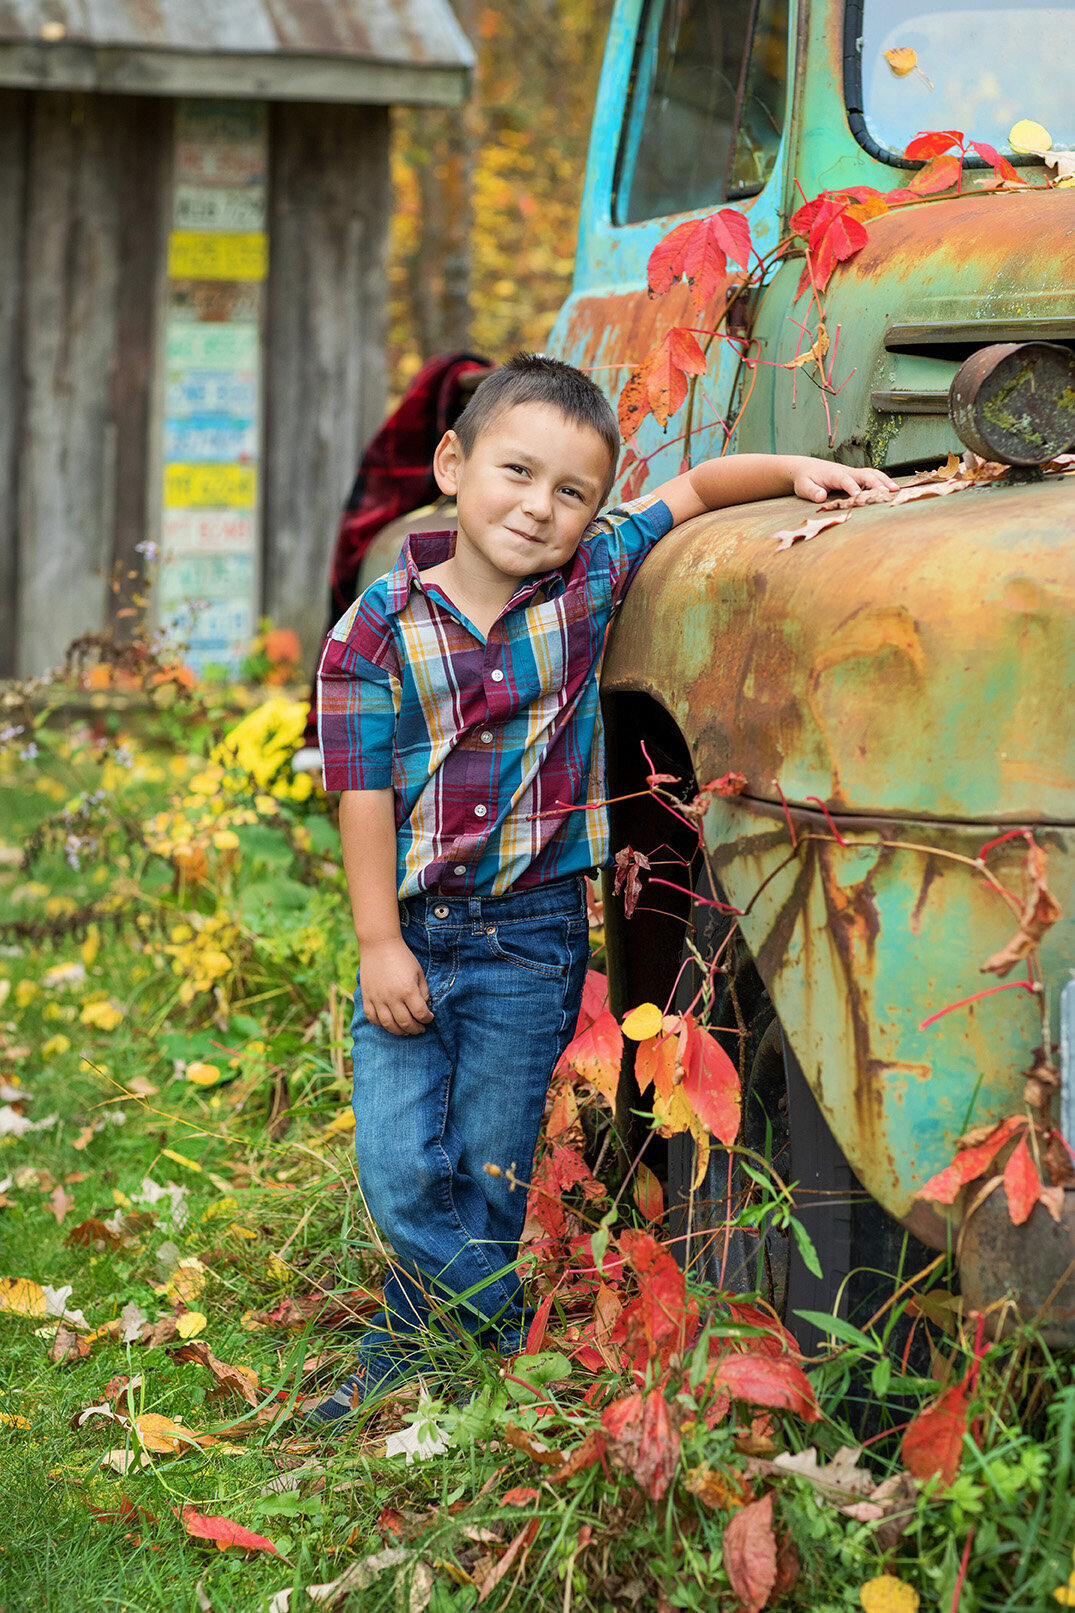 Young boy standing next to an old Ford pickup with his hand on the truck with Fall colored leaves on a vine growing up the truck.